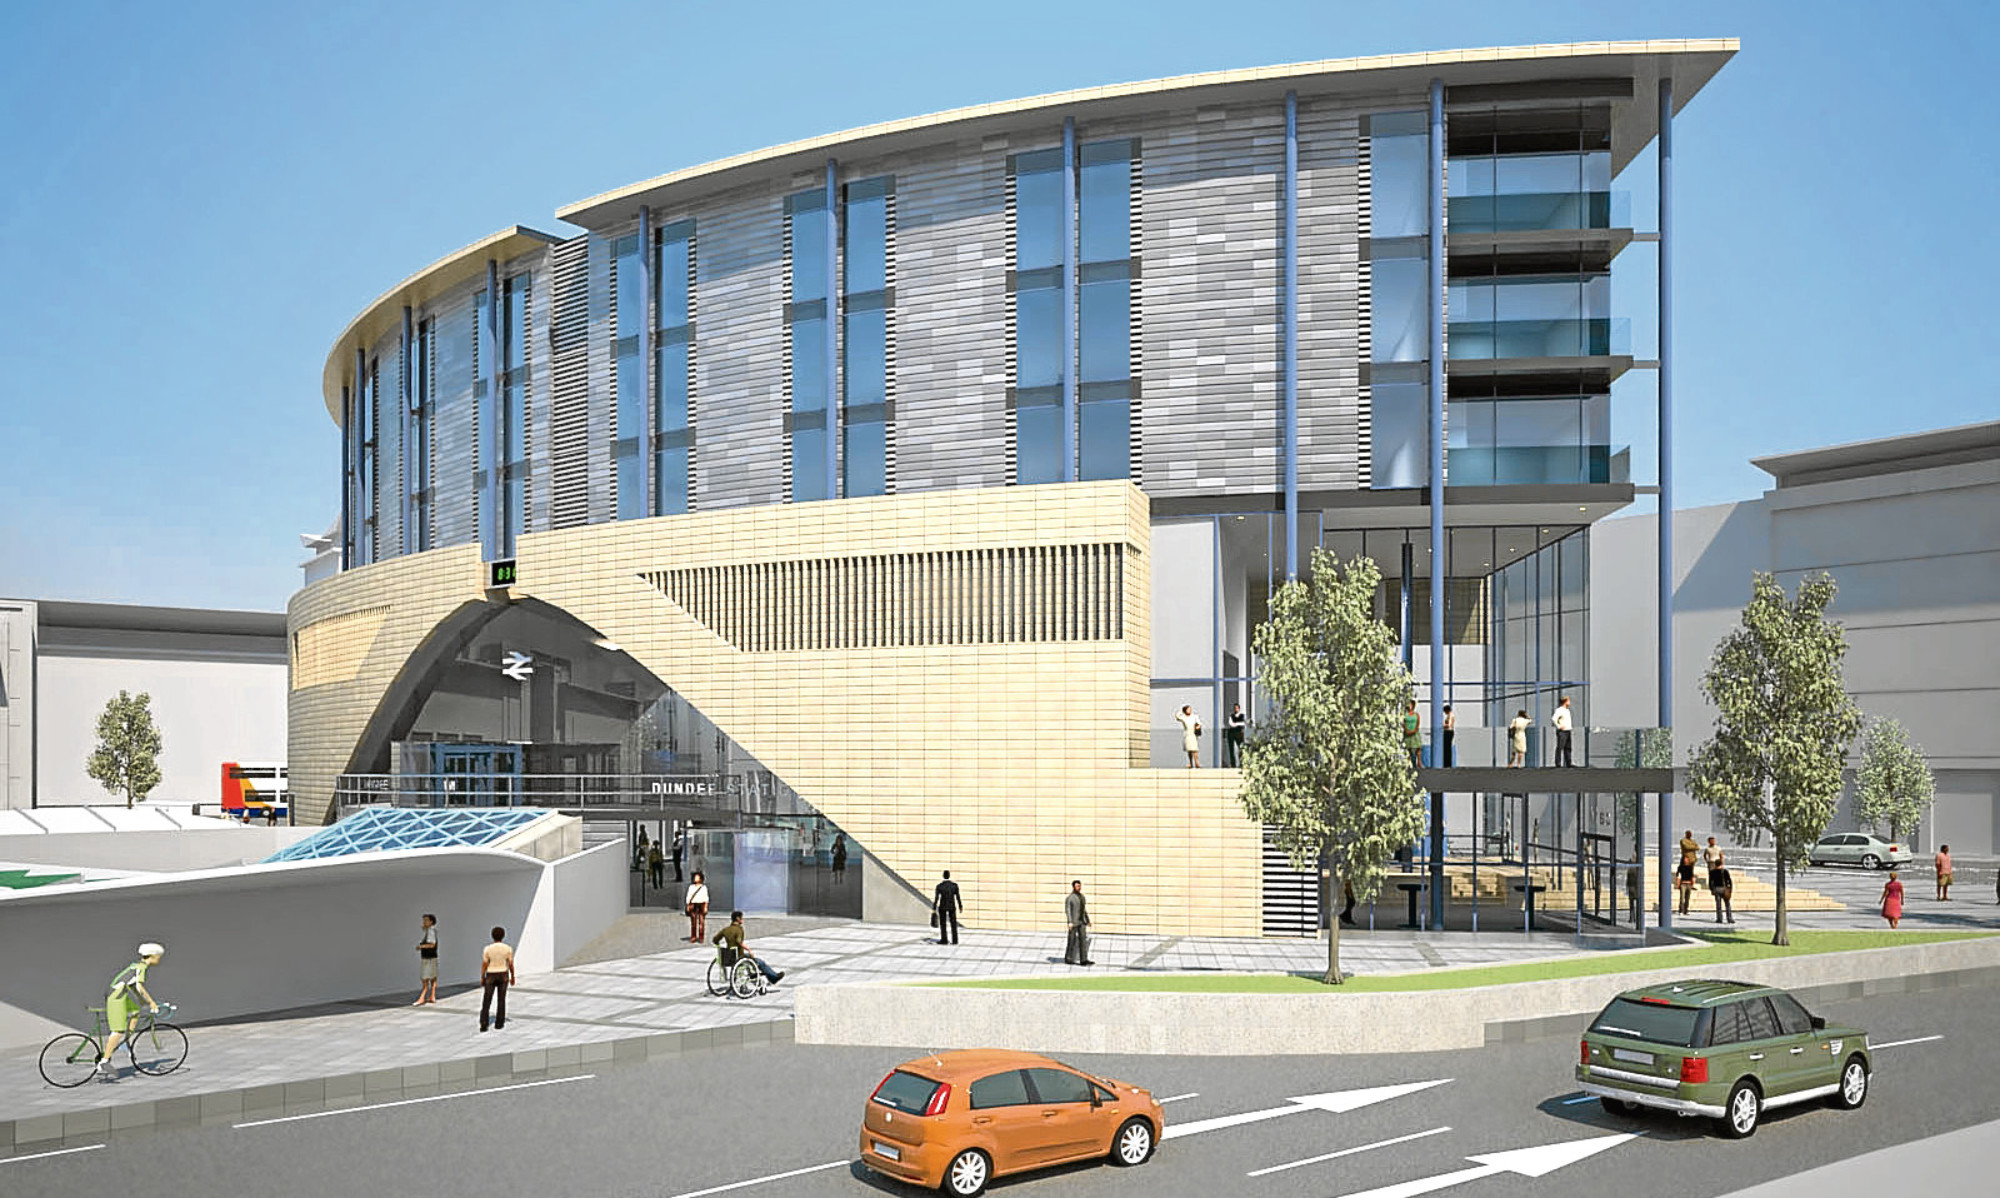 An impression of how Dundee railway station will look once the redevelopment is completed